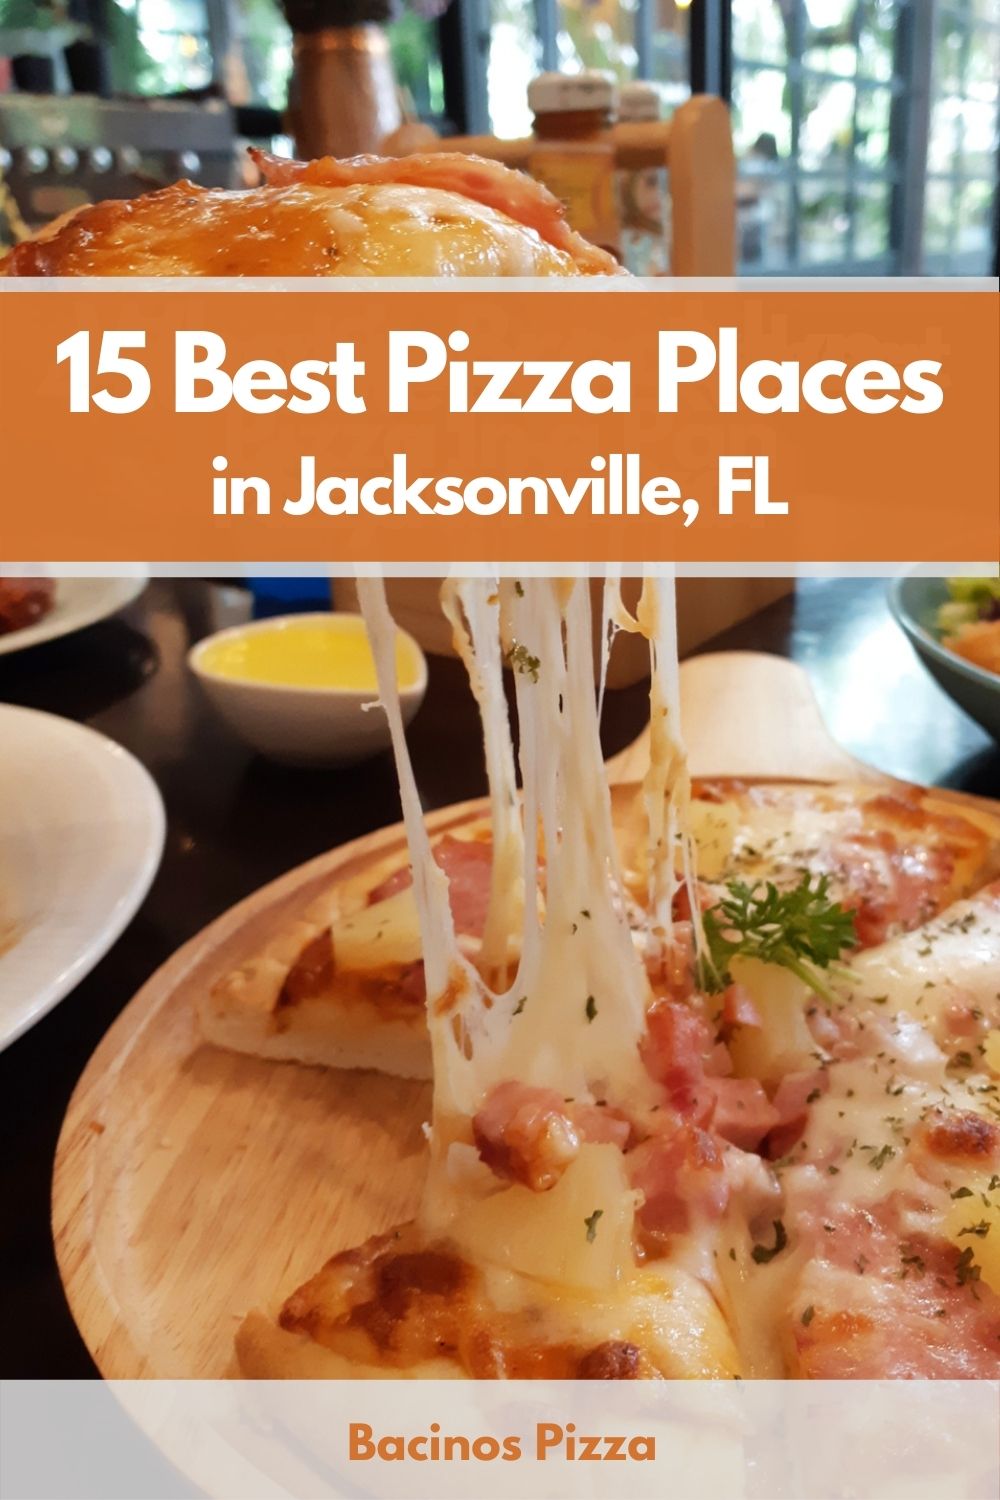 15 Best Pizza Places in Jacksonville, FL pin 2